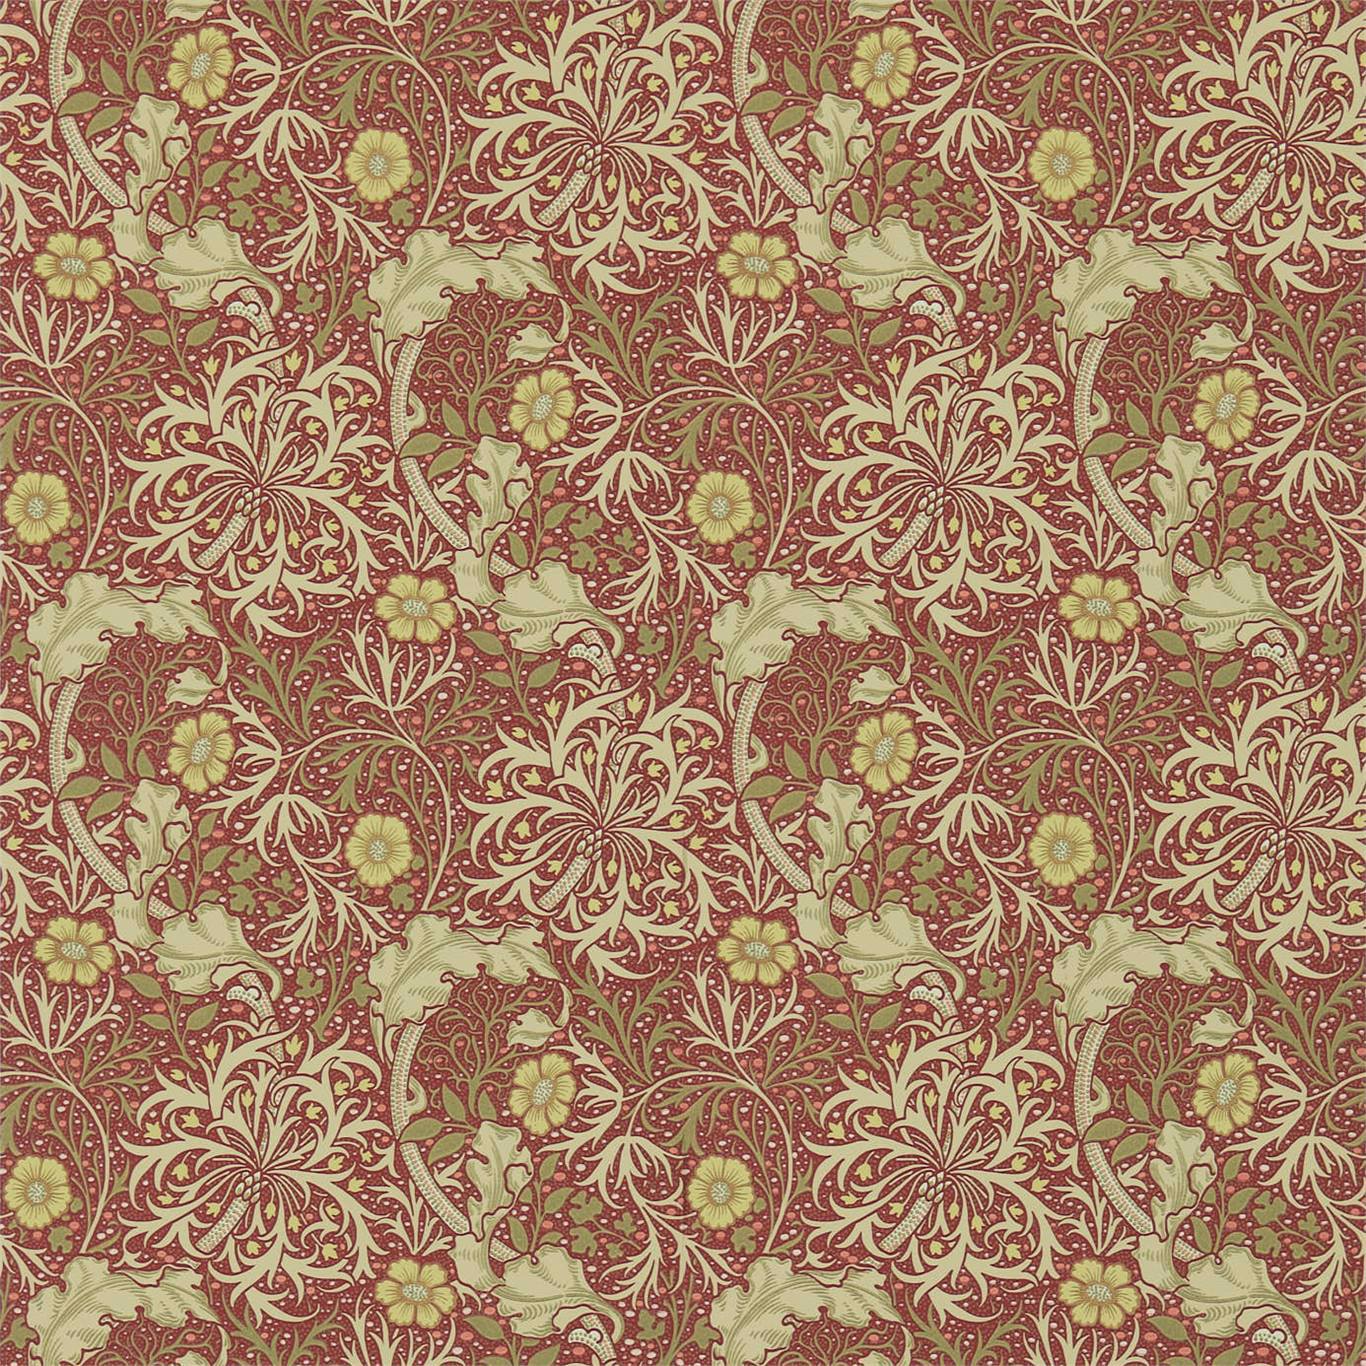 Morris Seaweed Red/Gold Wallpaper DCMW216846 by Morris & Co